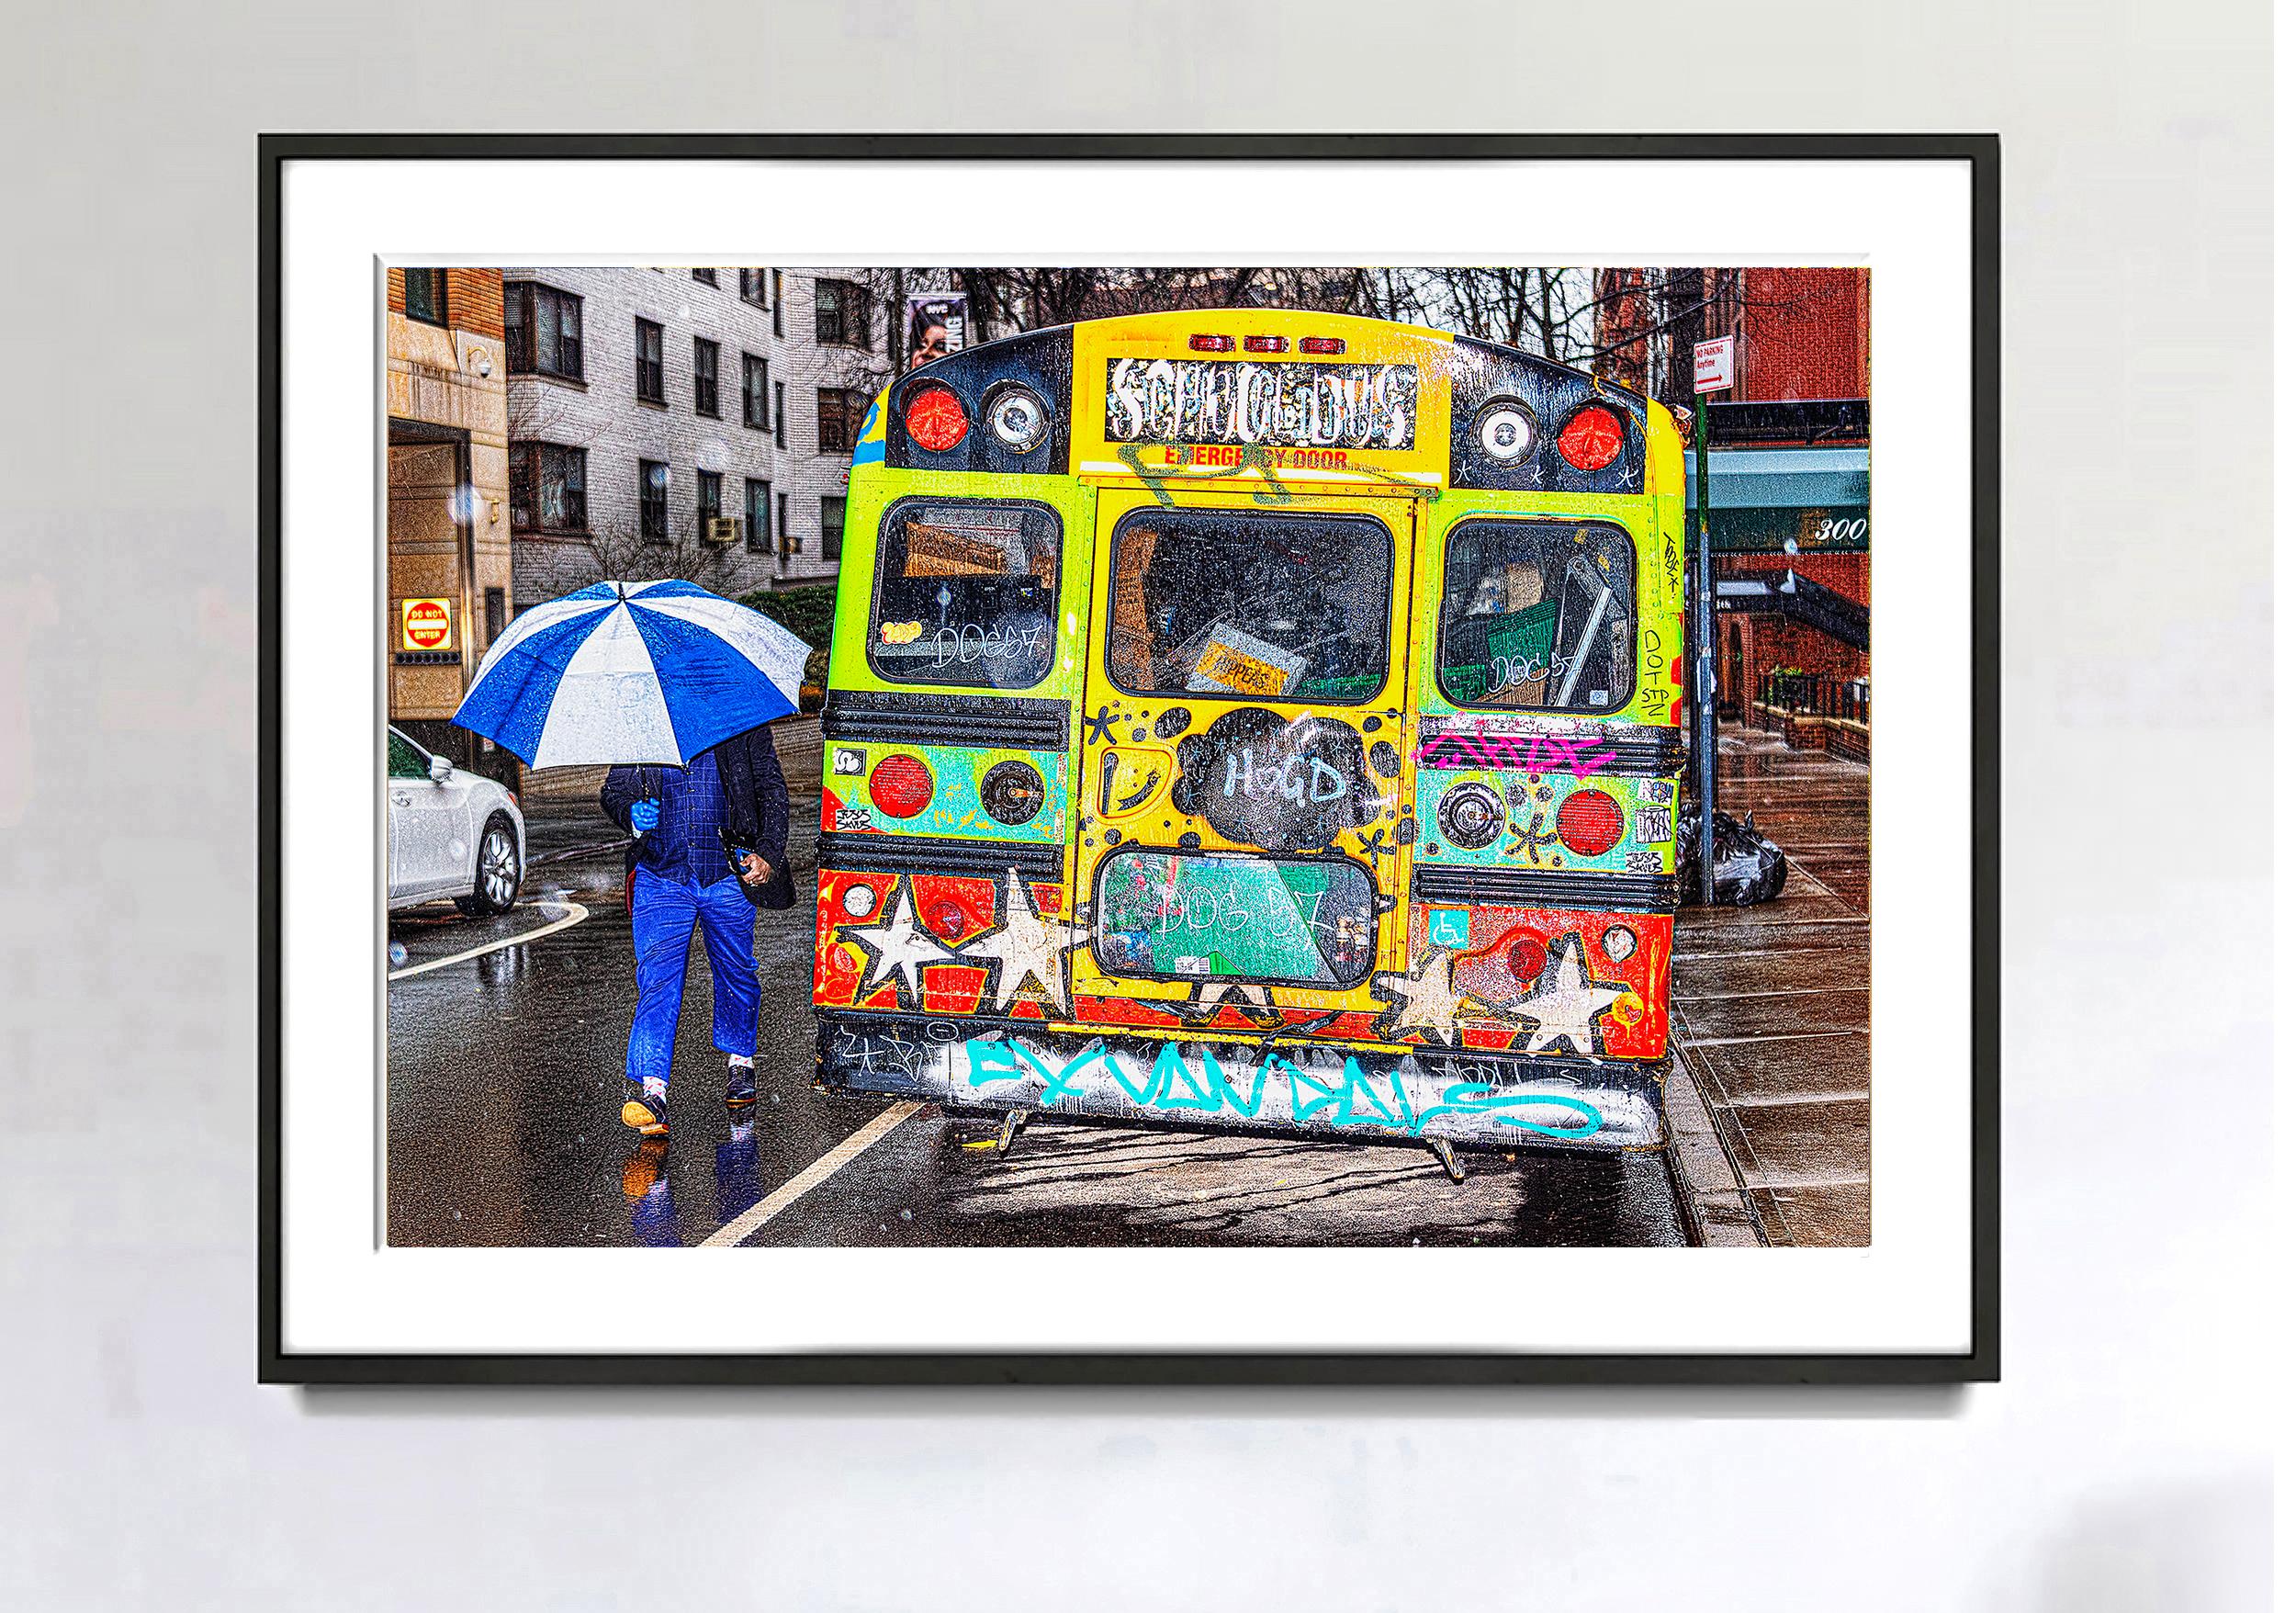 A Contrast of Two Art Styles - Graffiti Bus & Blue Umbrella on Rainy Day  - Photograph by Mitchell Funk